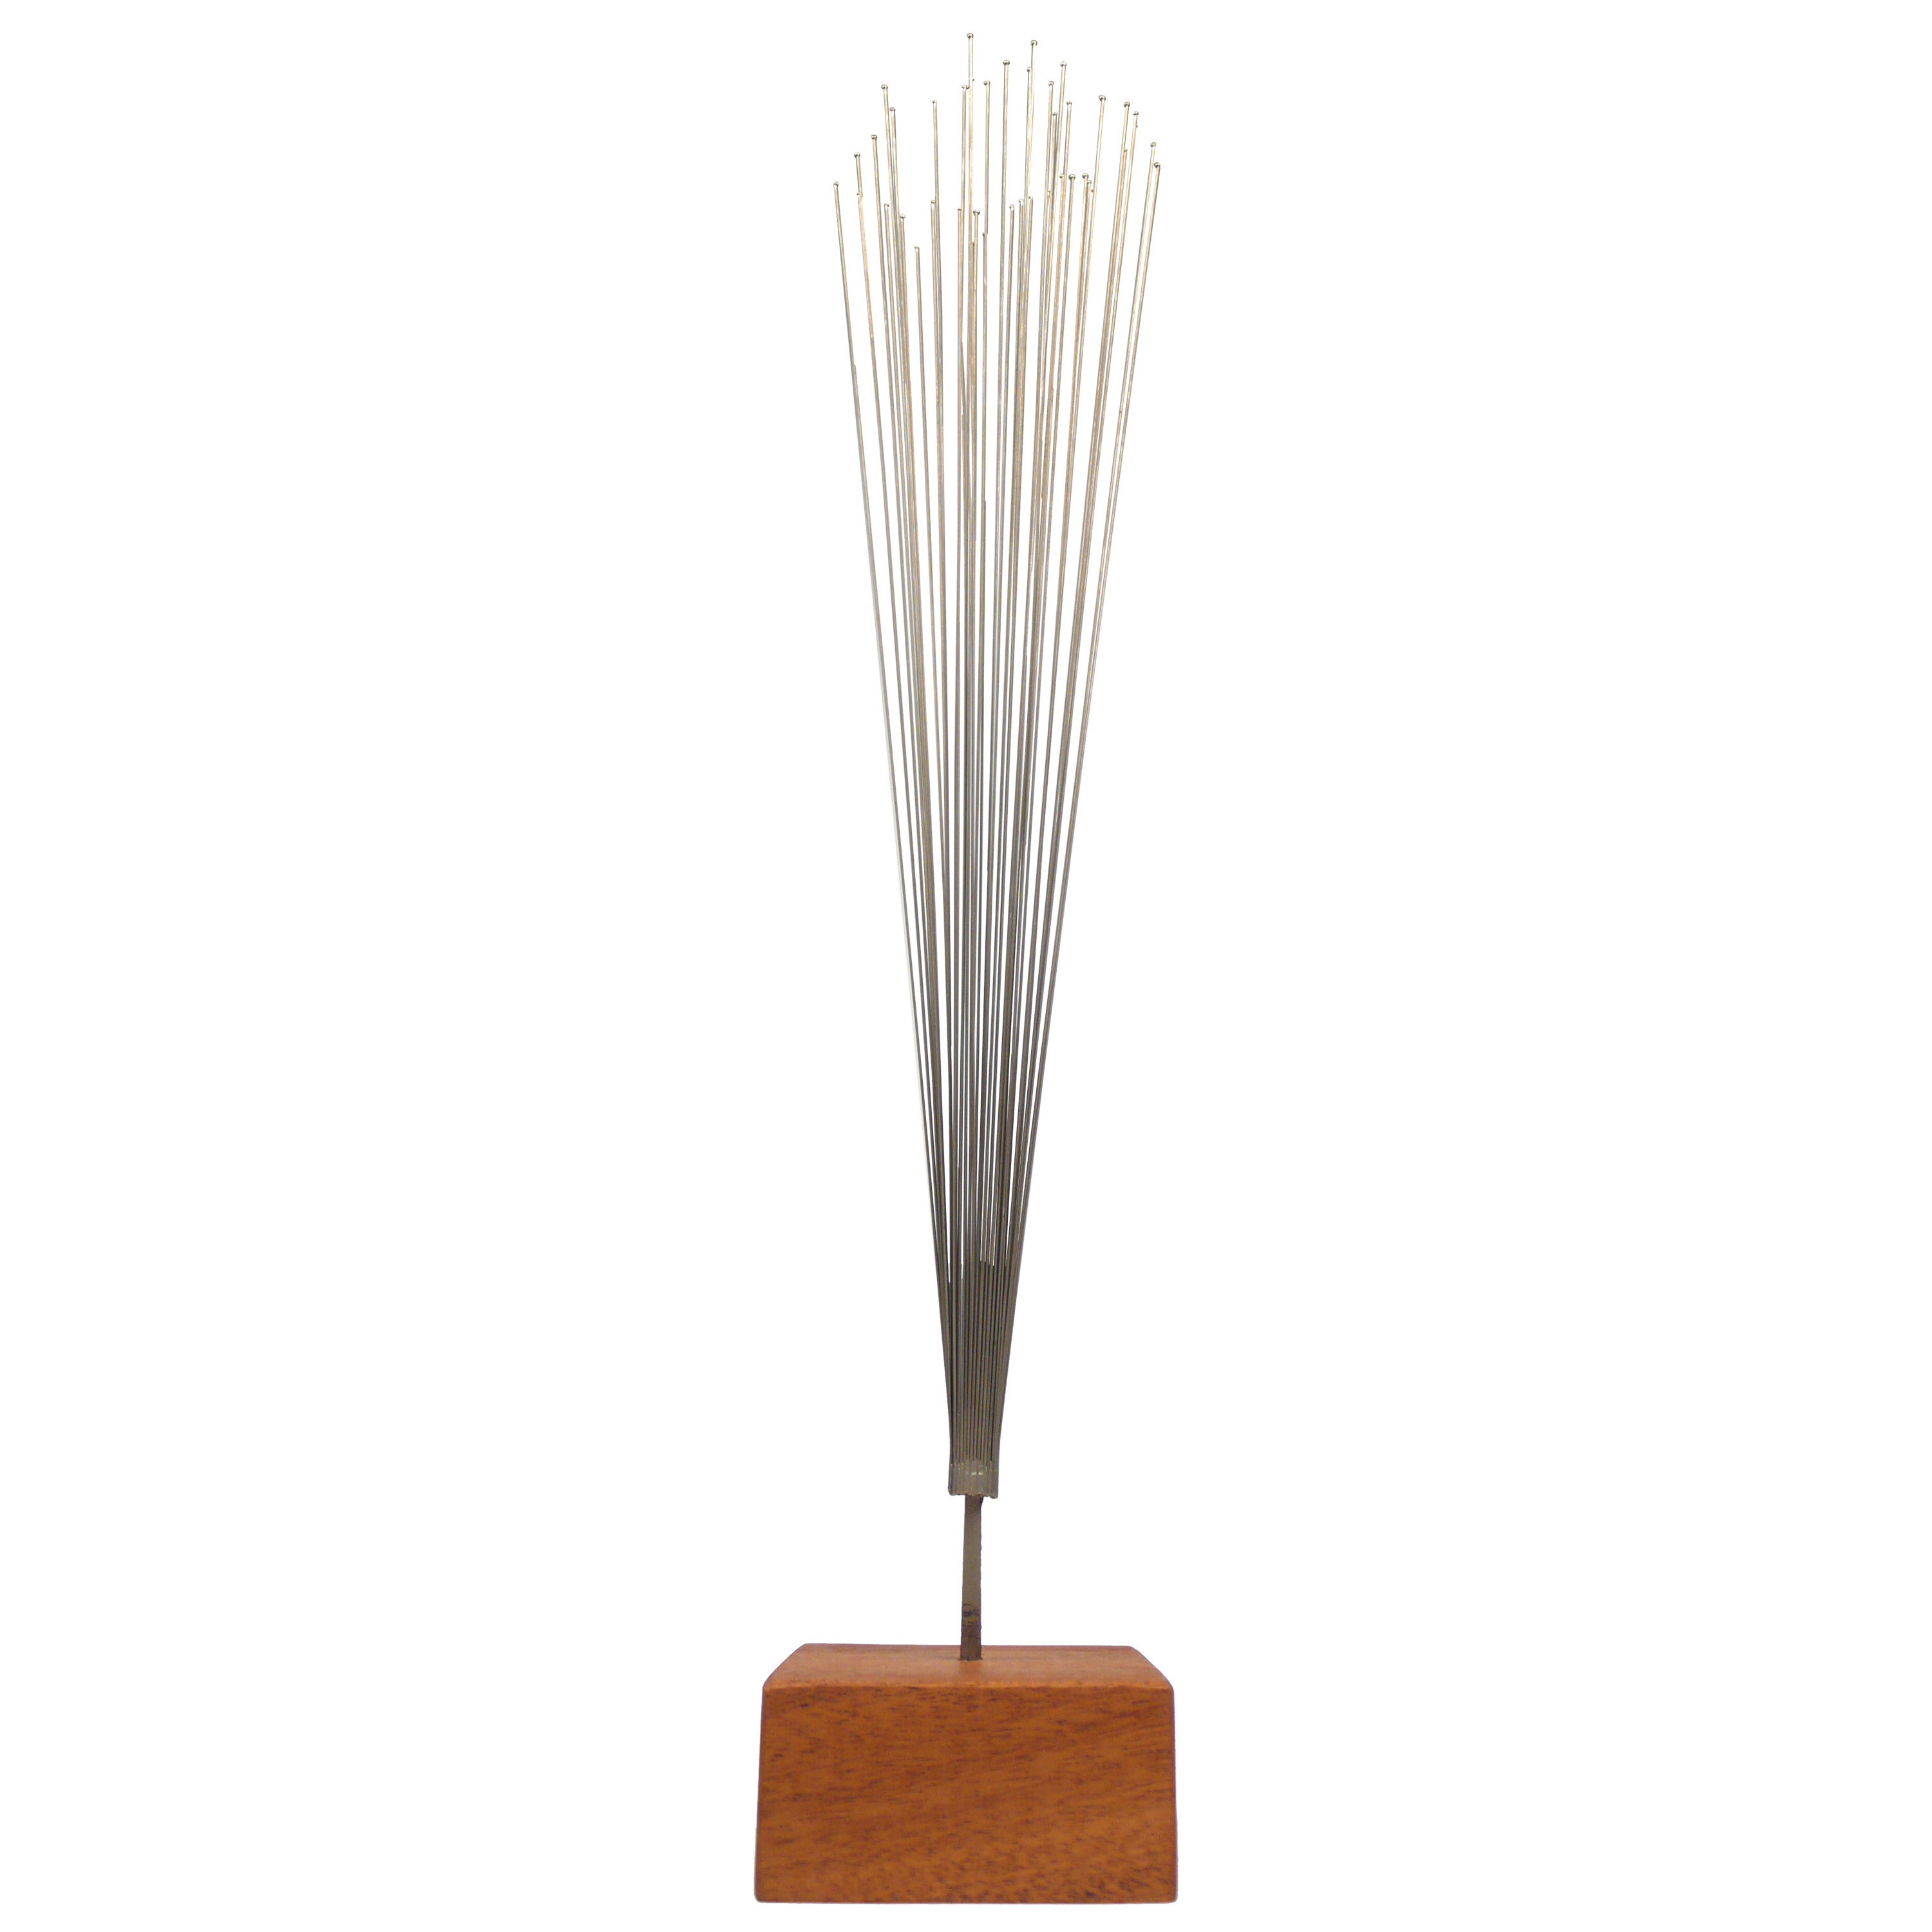 Harry Bertoia's Experimental Conical Wire Form